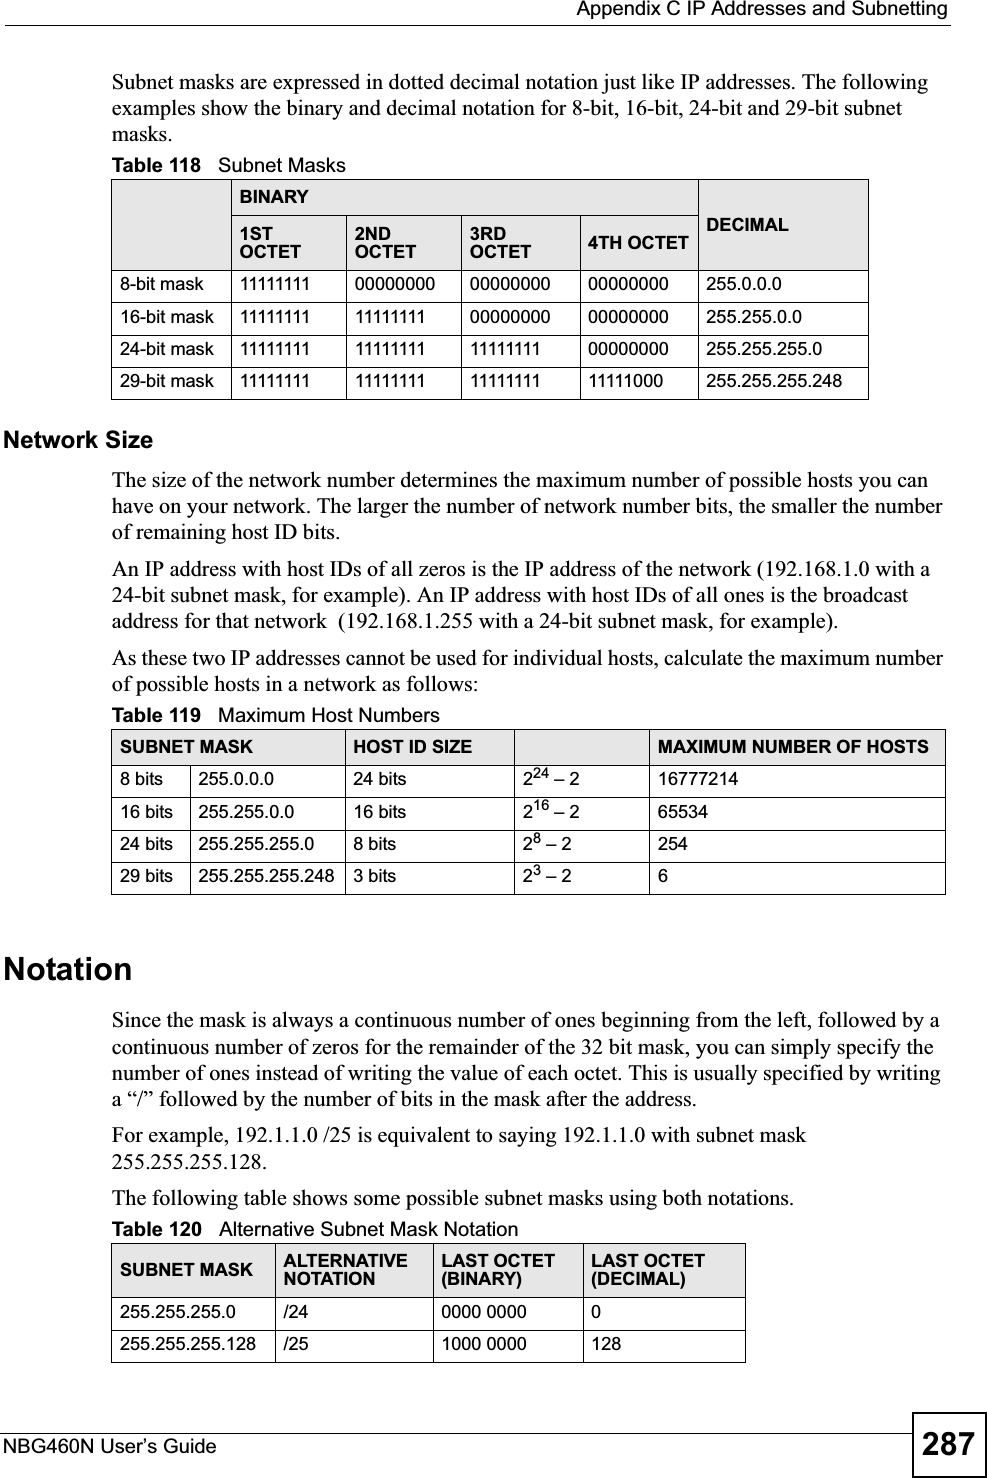  Appendix C IP Addresses and SubnettingNBG460N User’s Guide 287Subnet masks are expressed in dotted decimal notation just like IP addresses. The following examples show the binary and decimal notation for 8-bit, 16-bit, 24-bit and 29-bit subnet masks. Network SizeThe size of the network number determines the maximum number of possible hosts you can have on your network. The larger the number of network number bits, the smaller the number of remaining host ID bits. An IP address with host IDs of all zeros is the IP address of the network (192.168.1.0 with a 24-bit subnet mask, for example). An IP address with host IDs of all ones is the broadcast address for that network  (192.168.1.255 with a 24-bit subnet mask, for example).As these two IP addresses cannot be used for individual hosts, calculate the maximum number of possible hosts in a network as follows:NotationSince the mask is always a continuous number of ones beginning from the left, followed by a continuous number of zeros for the remainder of the 32 bit mask, you can simply specify the number of ones instead of writing the value of each octet. This is usually specified by writing a “/” followed by the number of bits in the mask after the address. For example, 192.1.1.0 /25 is equivalent to saying 192.1.1.0 with subnet mask 255.255.255.128. The following table shows some possible subnet masks using both notations. Table 118   Subnet MasksBINARYDECIMAL1ST OCTET2ND OCTET3RD OCTET 4TH OCTET8-bit mask 11111111 00000000 00000000 00000000 255.0.0.016-bit mask 11111111 11111111 00000000 00000000 255.255.0.024-bit mask 11111111 11111111 11111111 00000000 255.255.255.029-bit mask 11111111 11111111 11111111 11111000 255.255.255.248Table 119   Maximum Host NumbersSUBNET MASK HOST ID SIZE MAXIMUM NUMBER OF HOSTS8 bits 255.0.0.0 24 bits 224 – 2 1677721416 bits 255.255.0.0 16 bits 216 – 2 6553424 bits 255.255.255.0 8 bits 28 – 2 25429 bits 255.255.255.248 3 bits 23 – 2 6Table 120   Alternative Subnet Mask NotationSUBNET MASK ALTERNATIVE NOTATIONLAST OCTET (BINARY)LAST OCTET (DECIMAL)255.255.255.0 /24 0000 0000 0255.255.255.128 /25 1000 0000 128